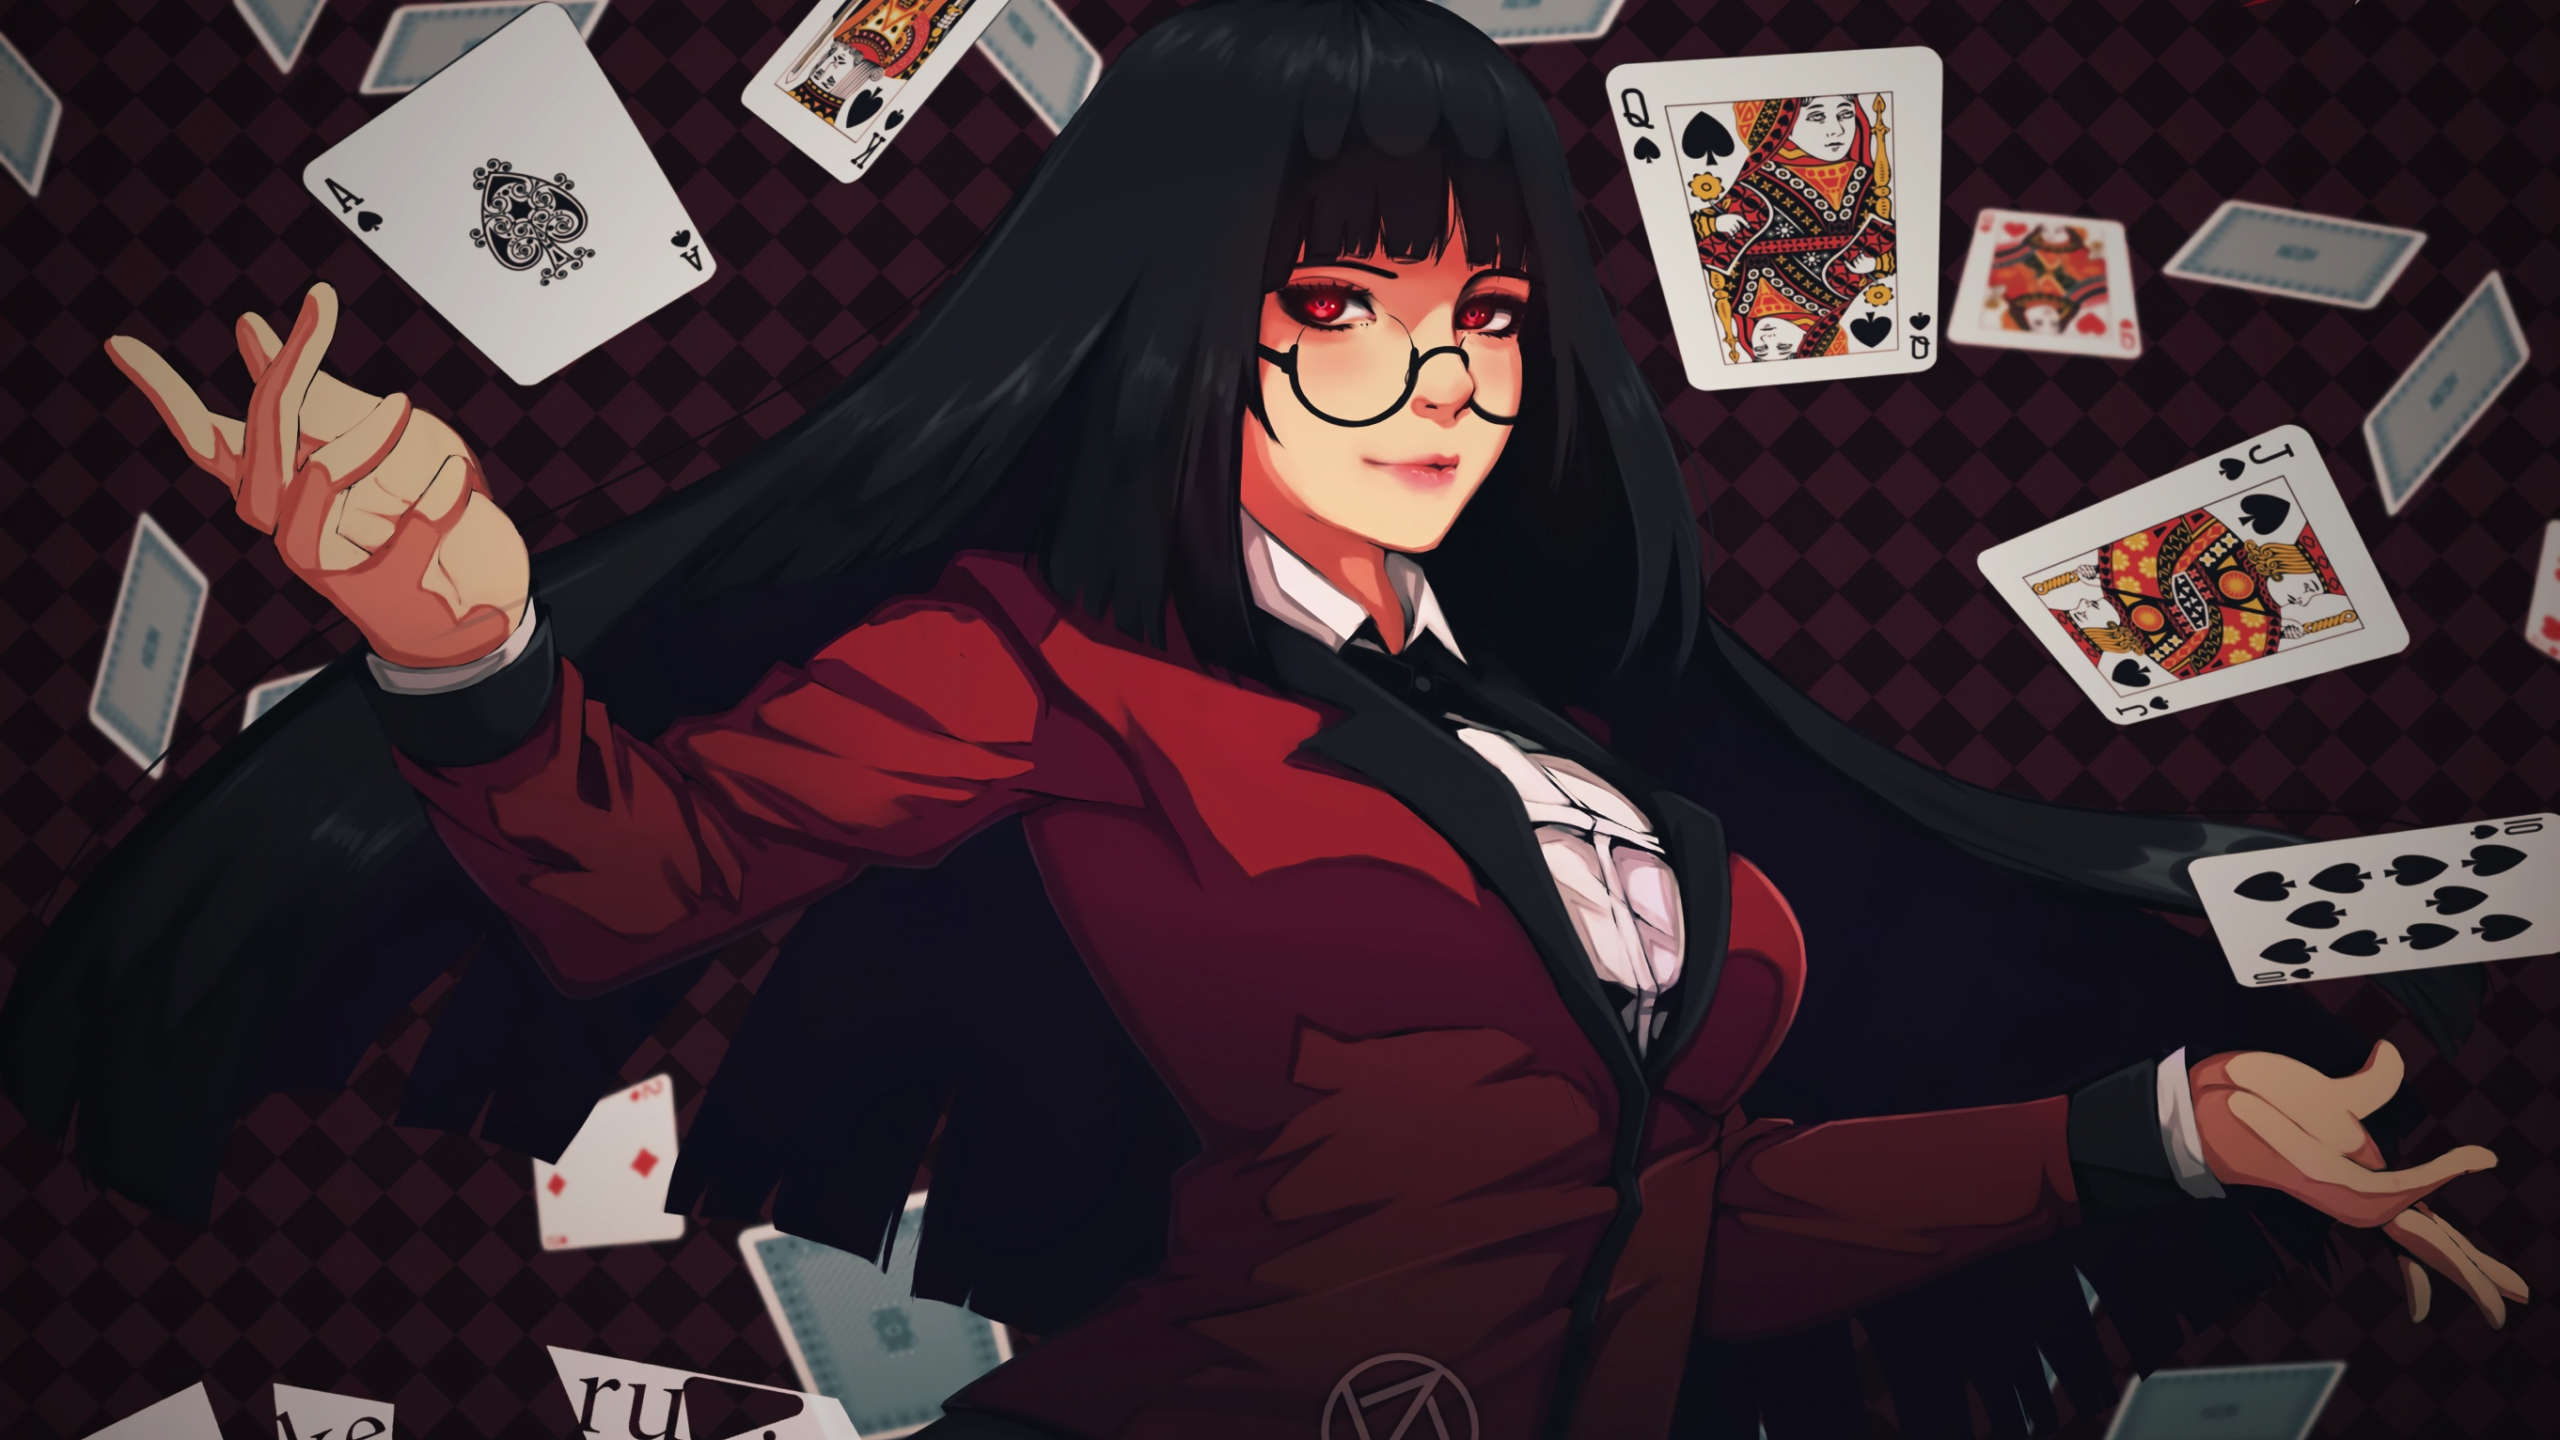 Yumeko Wallpaper Pc Use Them As Wallpapers For Your Mobile Or Desktop